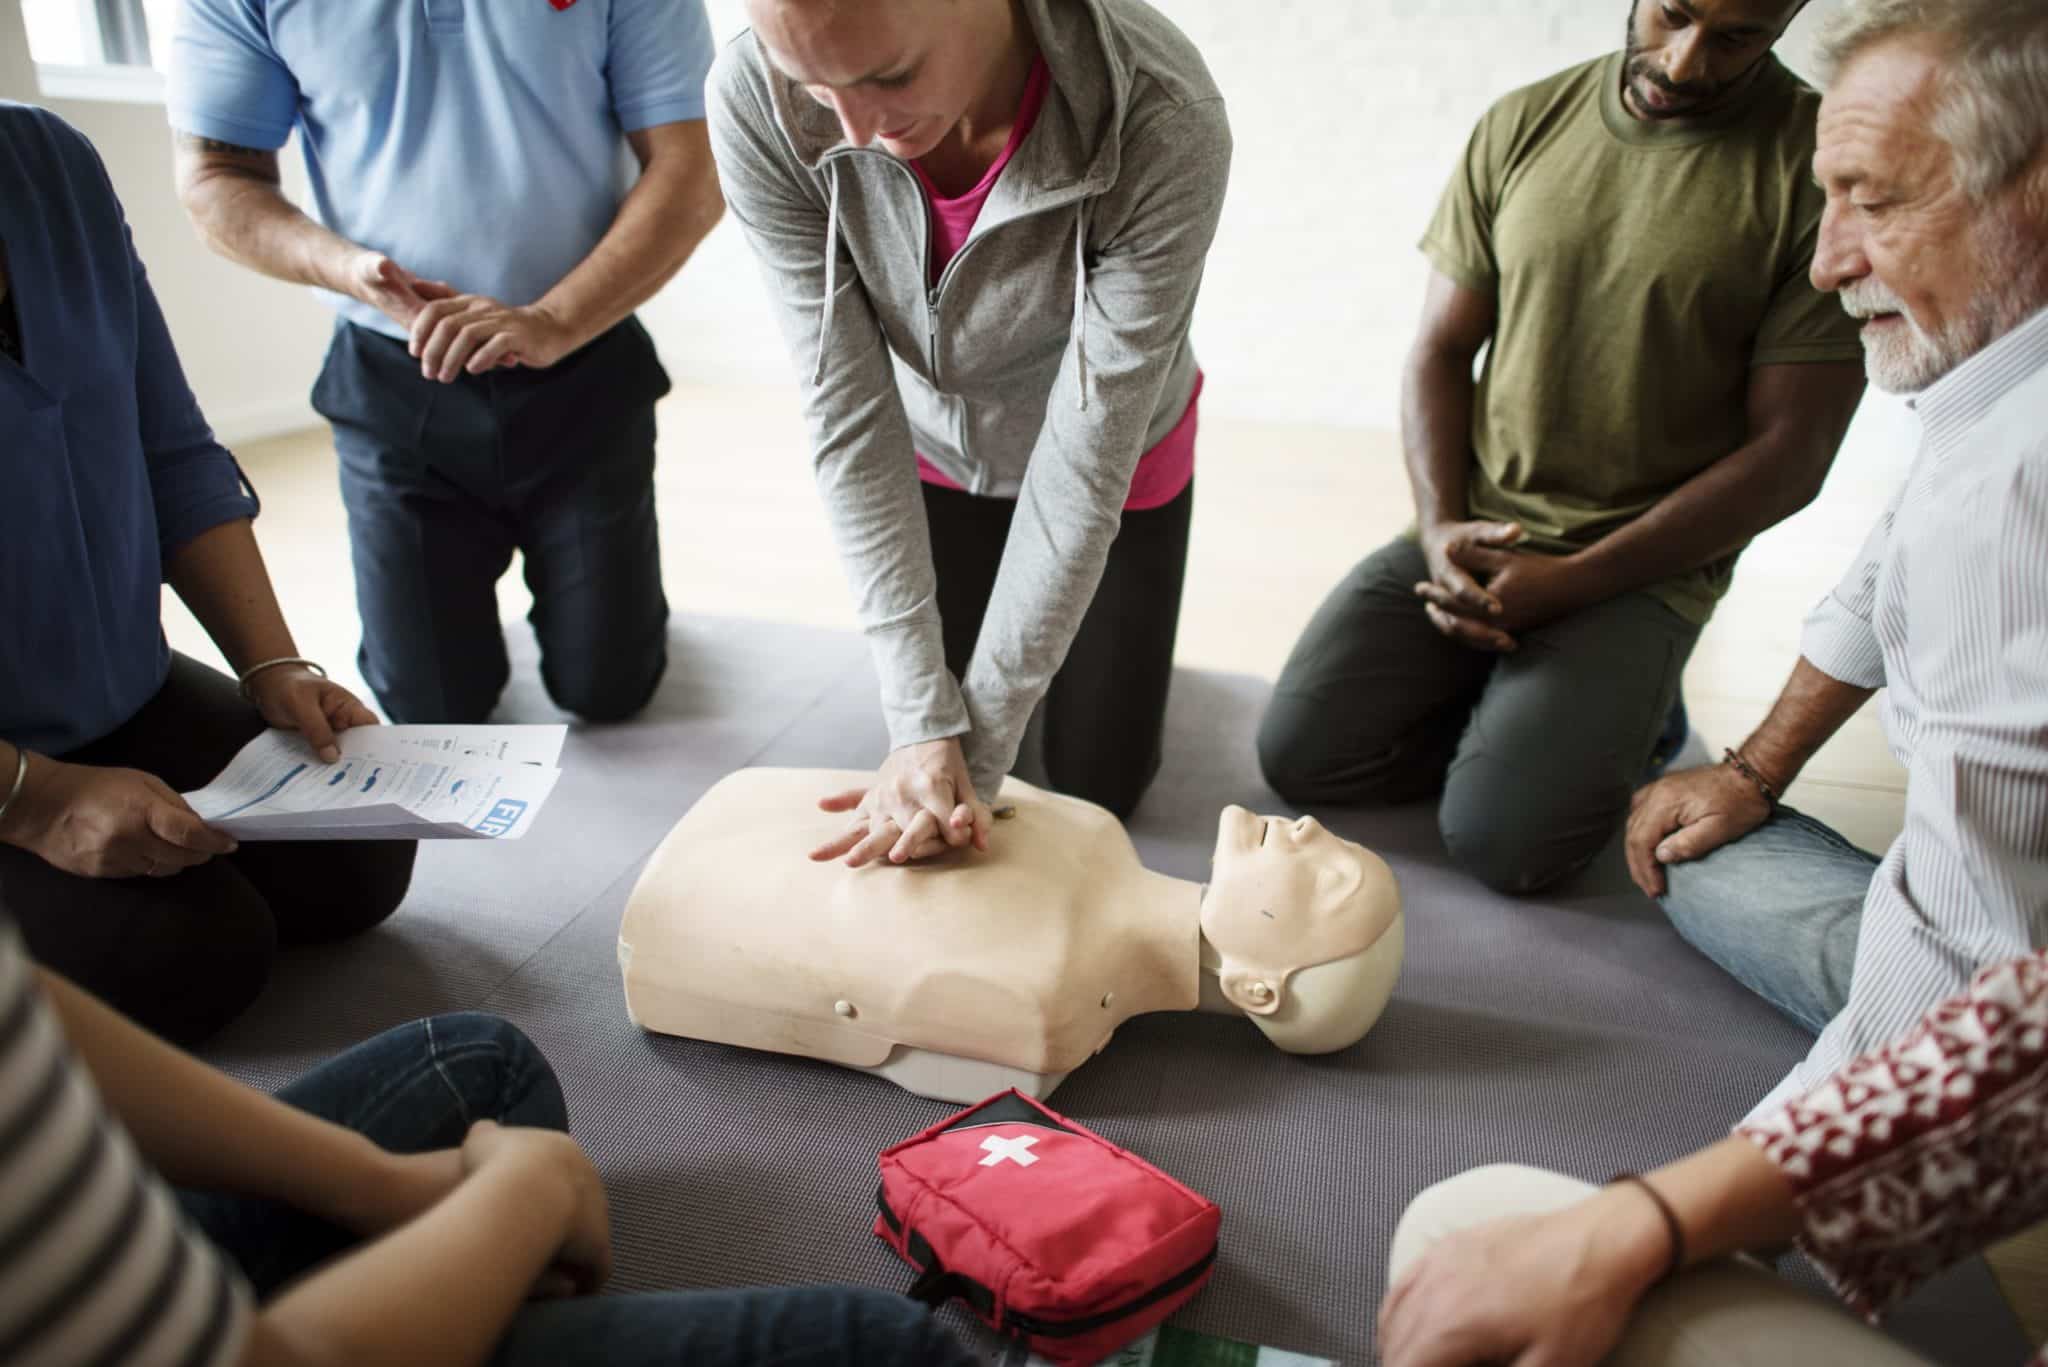 group-of-diverse-people-in-cpr-training-class-scaled.jpg